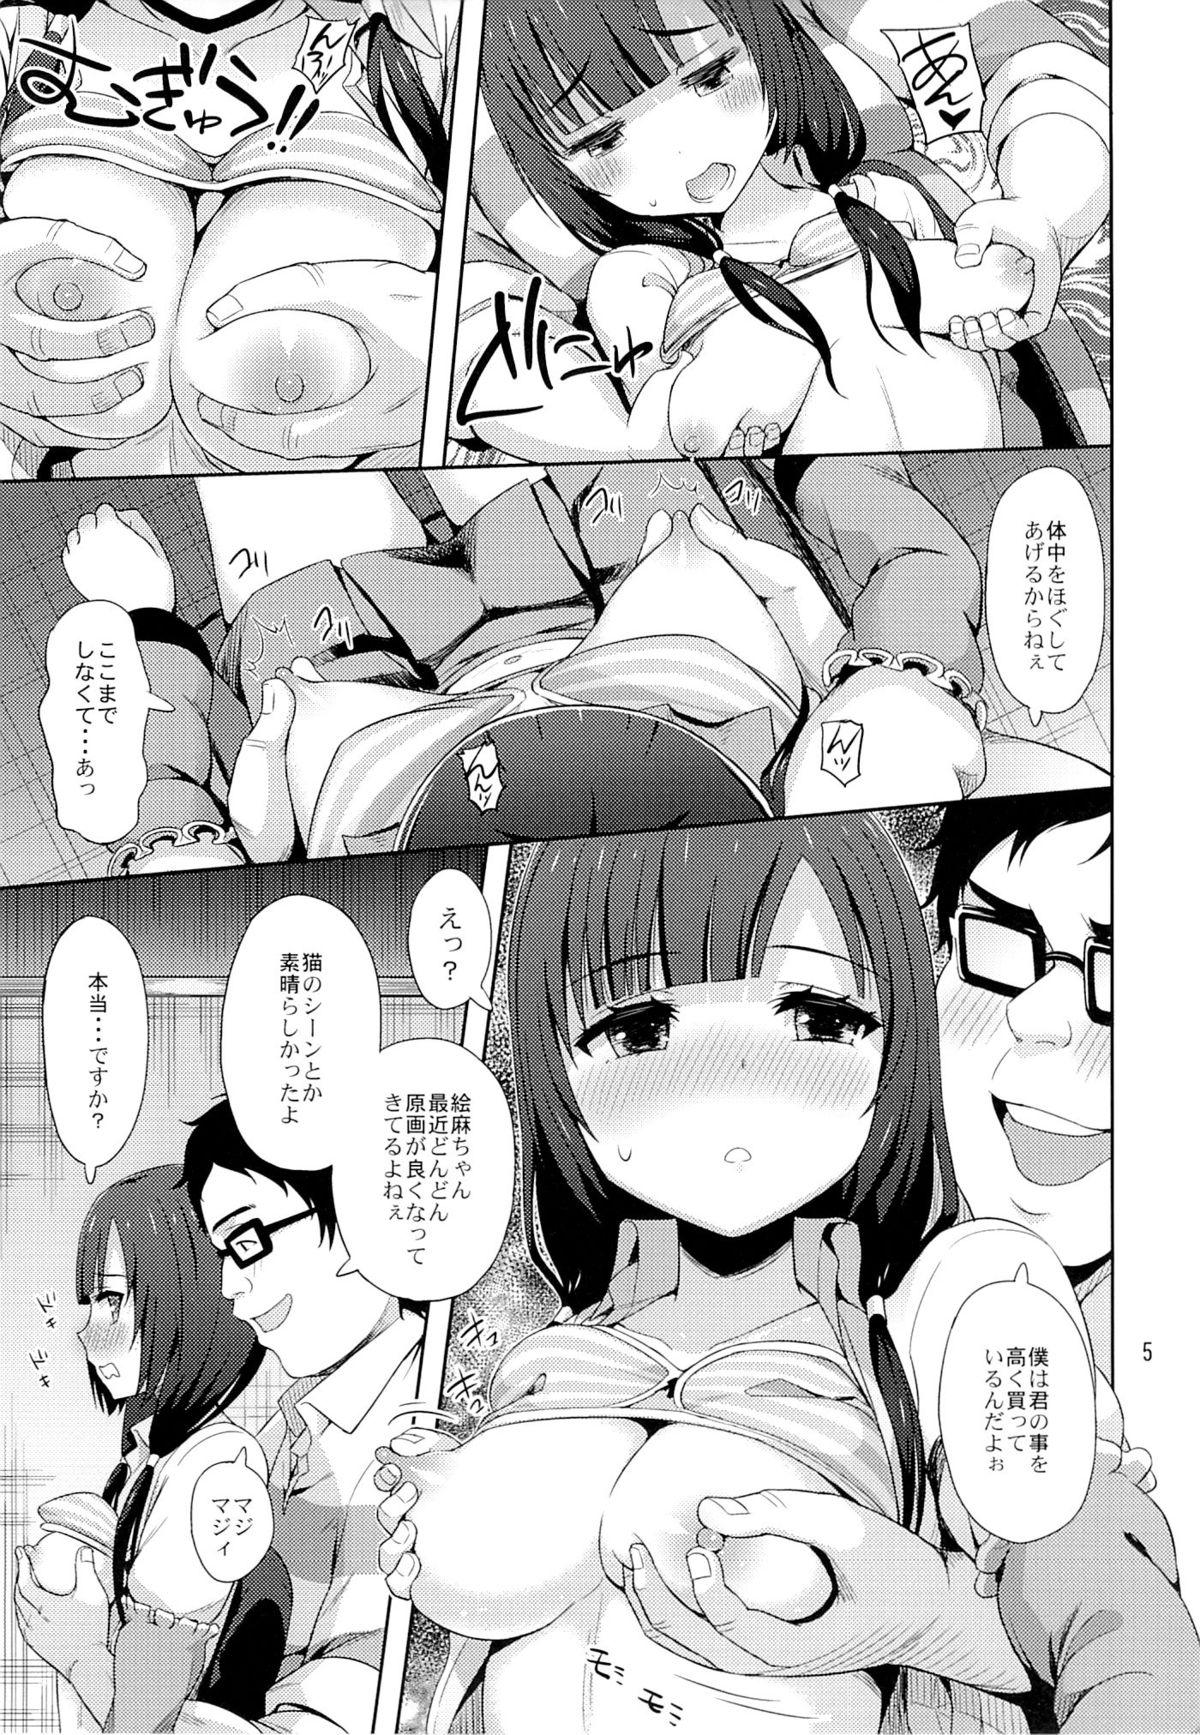 Red Head Emabako - Shirobako Ass To Mouth - Page 6